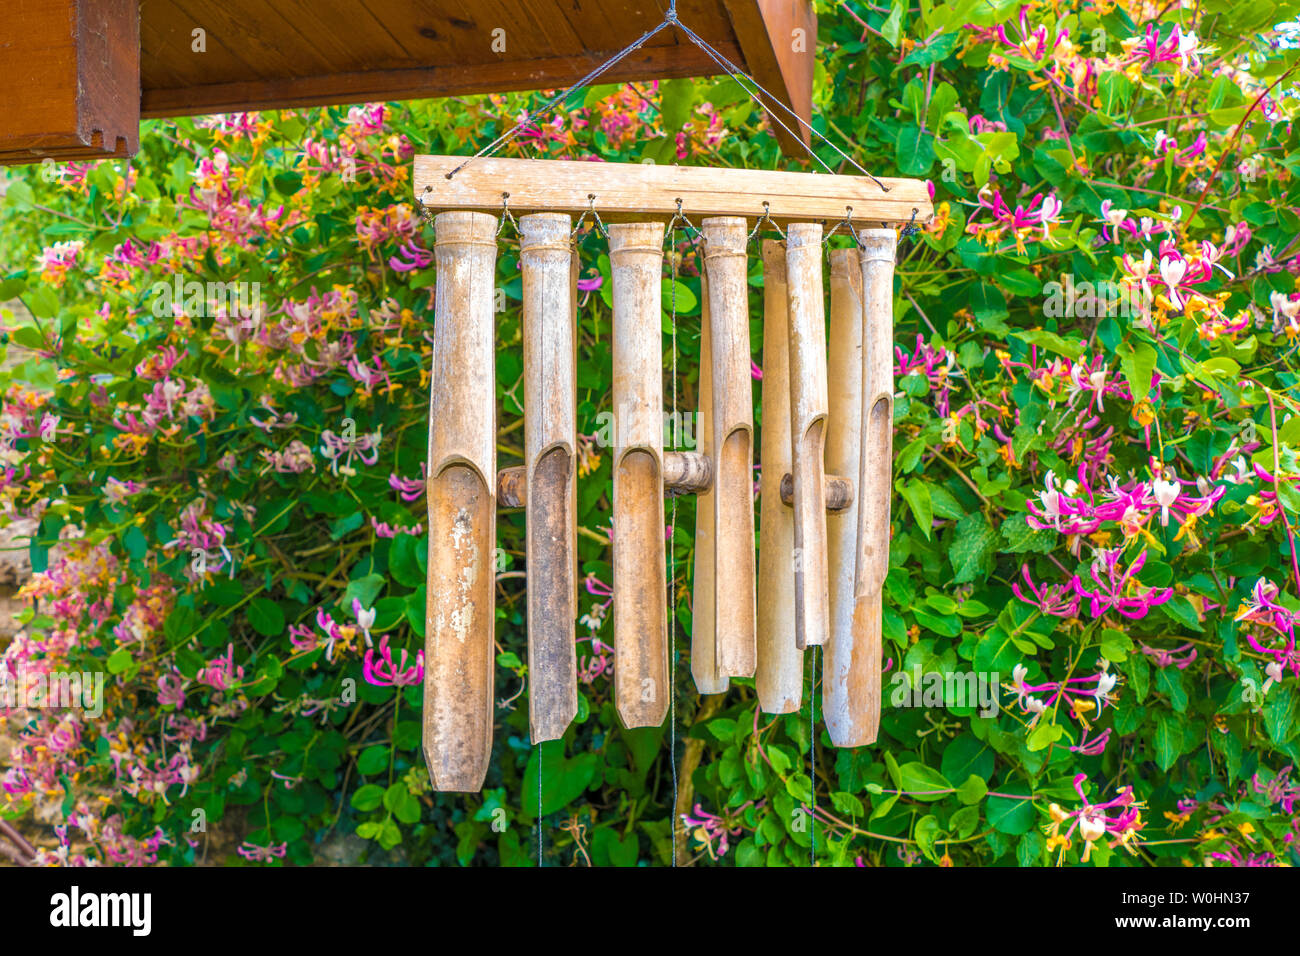 An old set of bamboo wind chimes hanging from a cabin roof in front of a pretty flowering bush, in a suburban garden. England, UK. Stock Photo